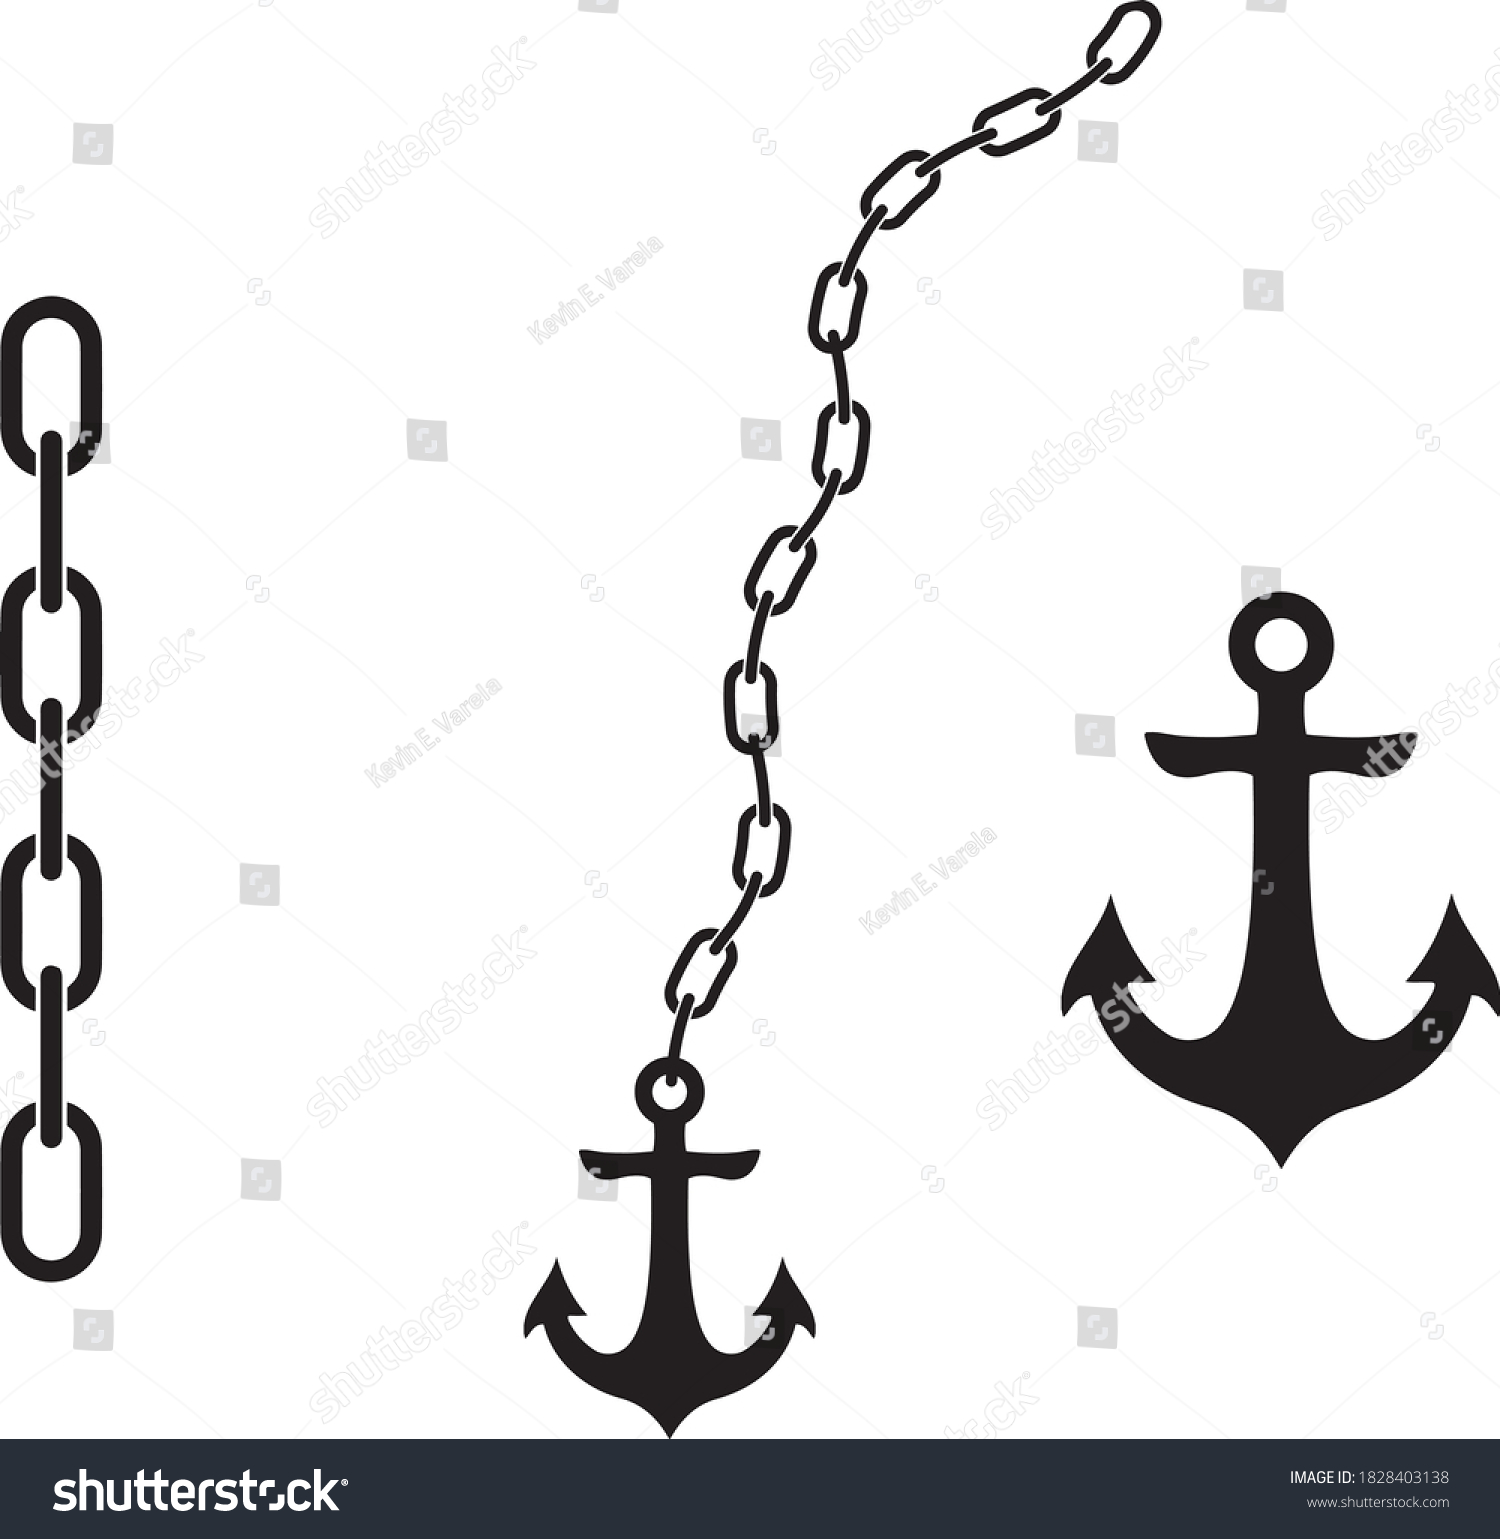 SVG of Anchor with chains and isolated object for patterns svg